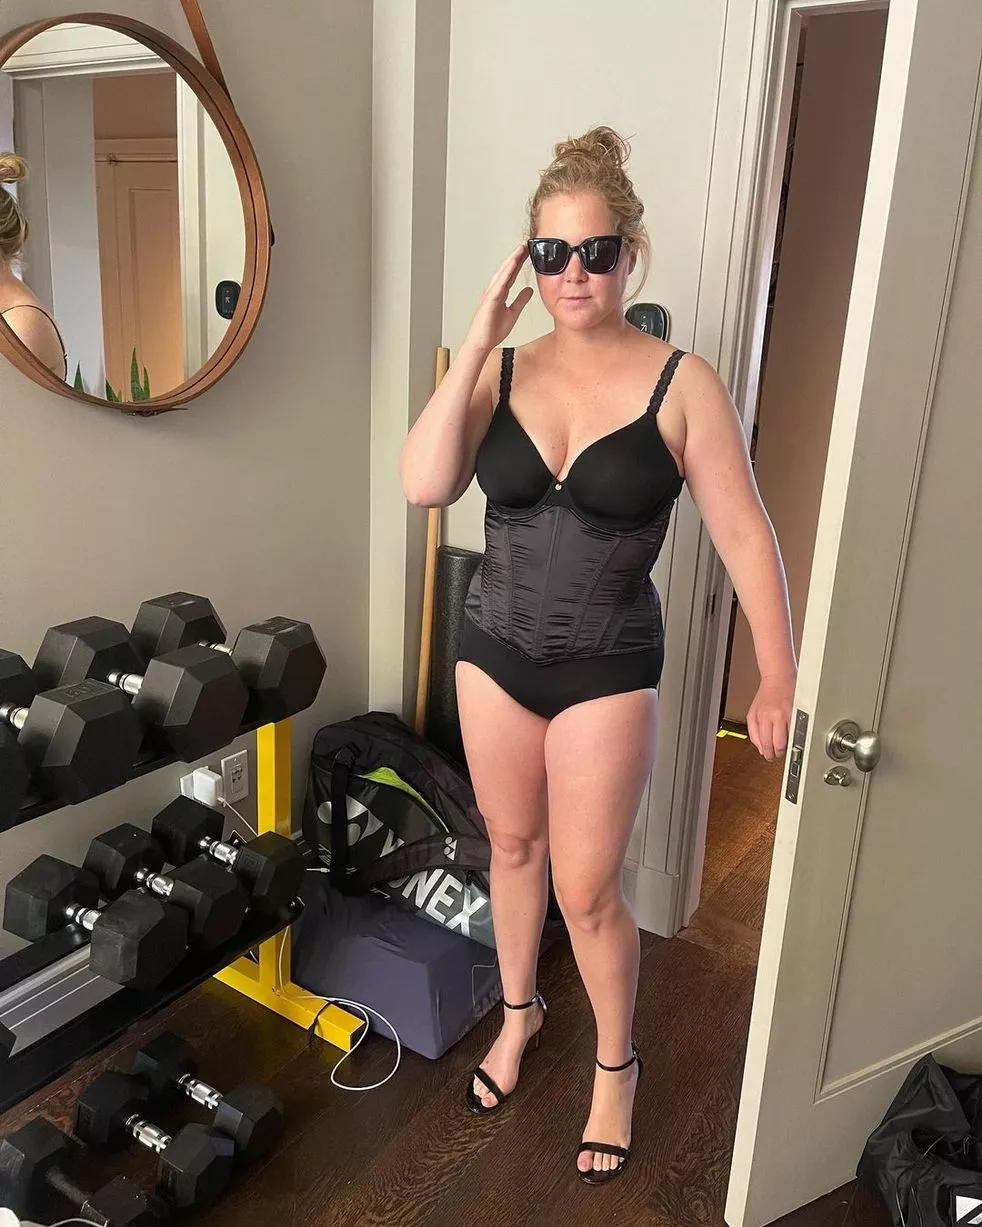 badshah king khan recommends Amy Schumer Naked Images